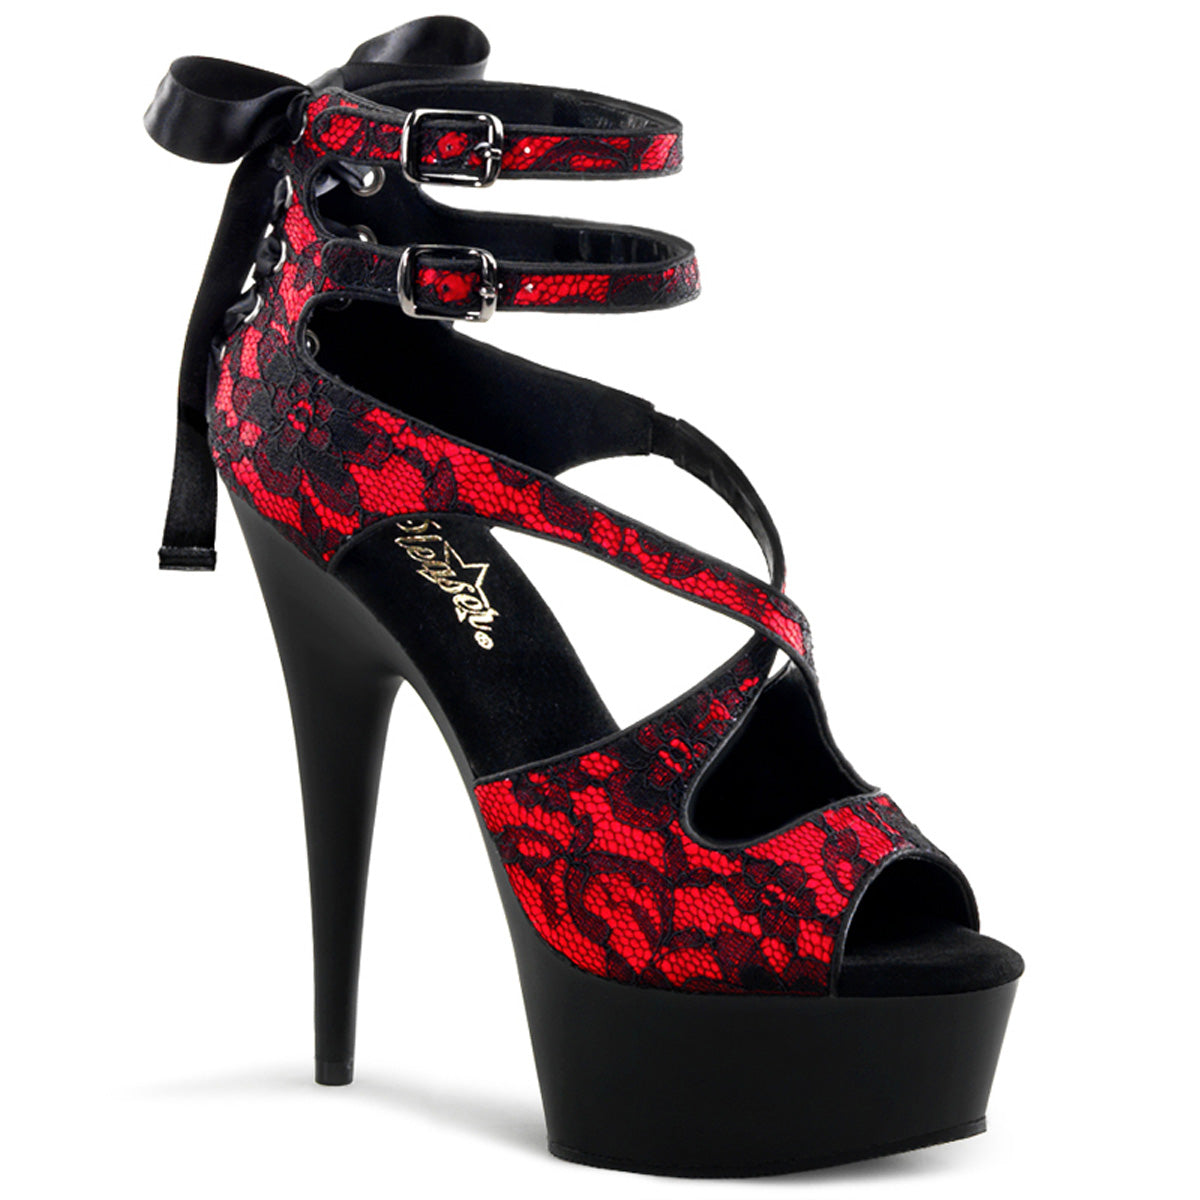 DELIGHT-678LC 6" Heel Red Satin Pole Dancing Platforms-Pleaser- Sexy Shoes